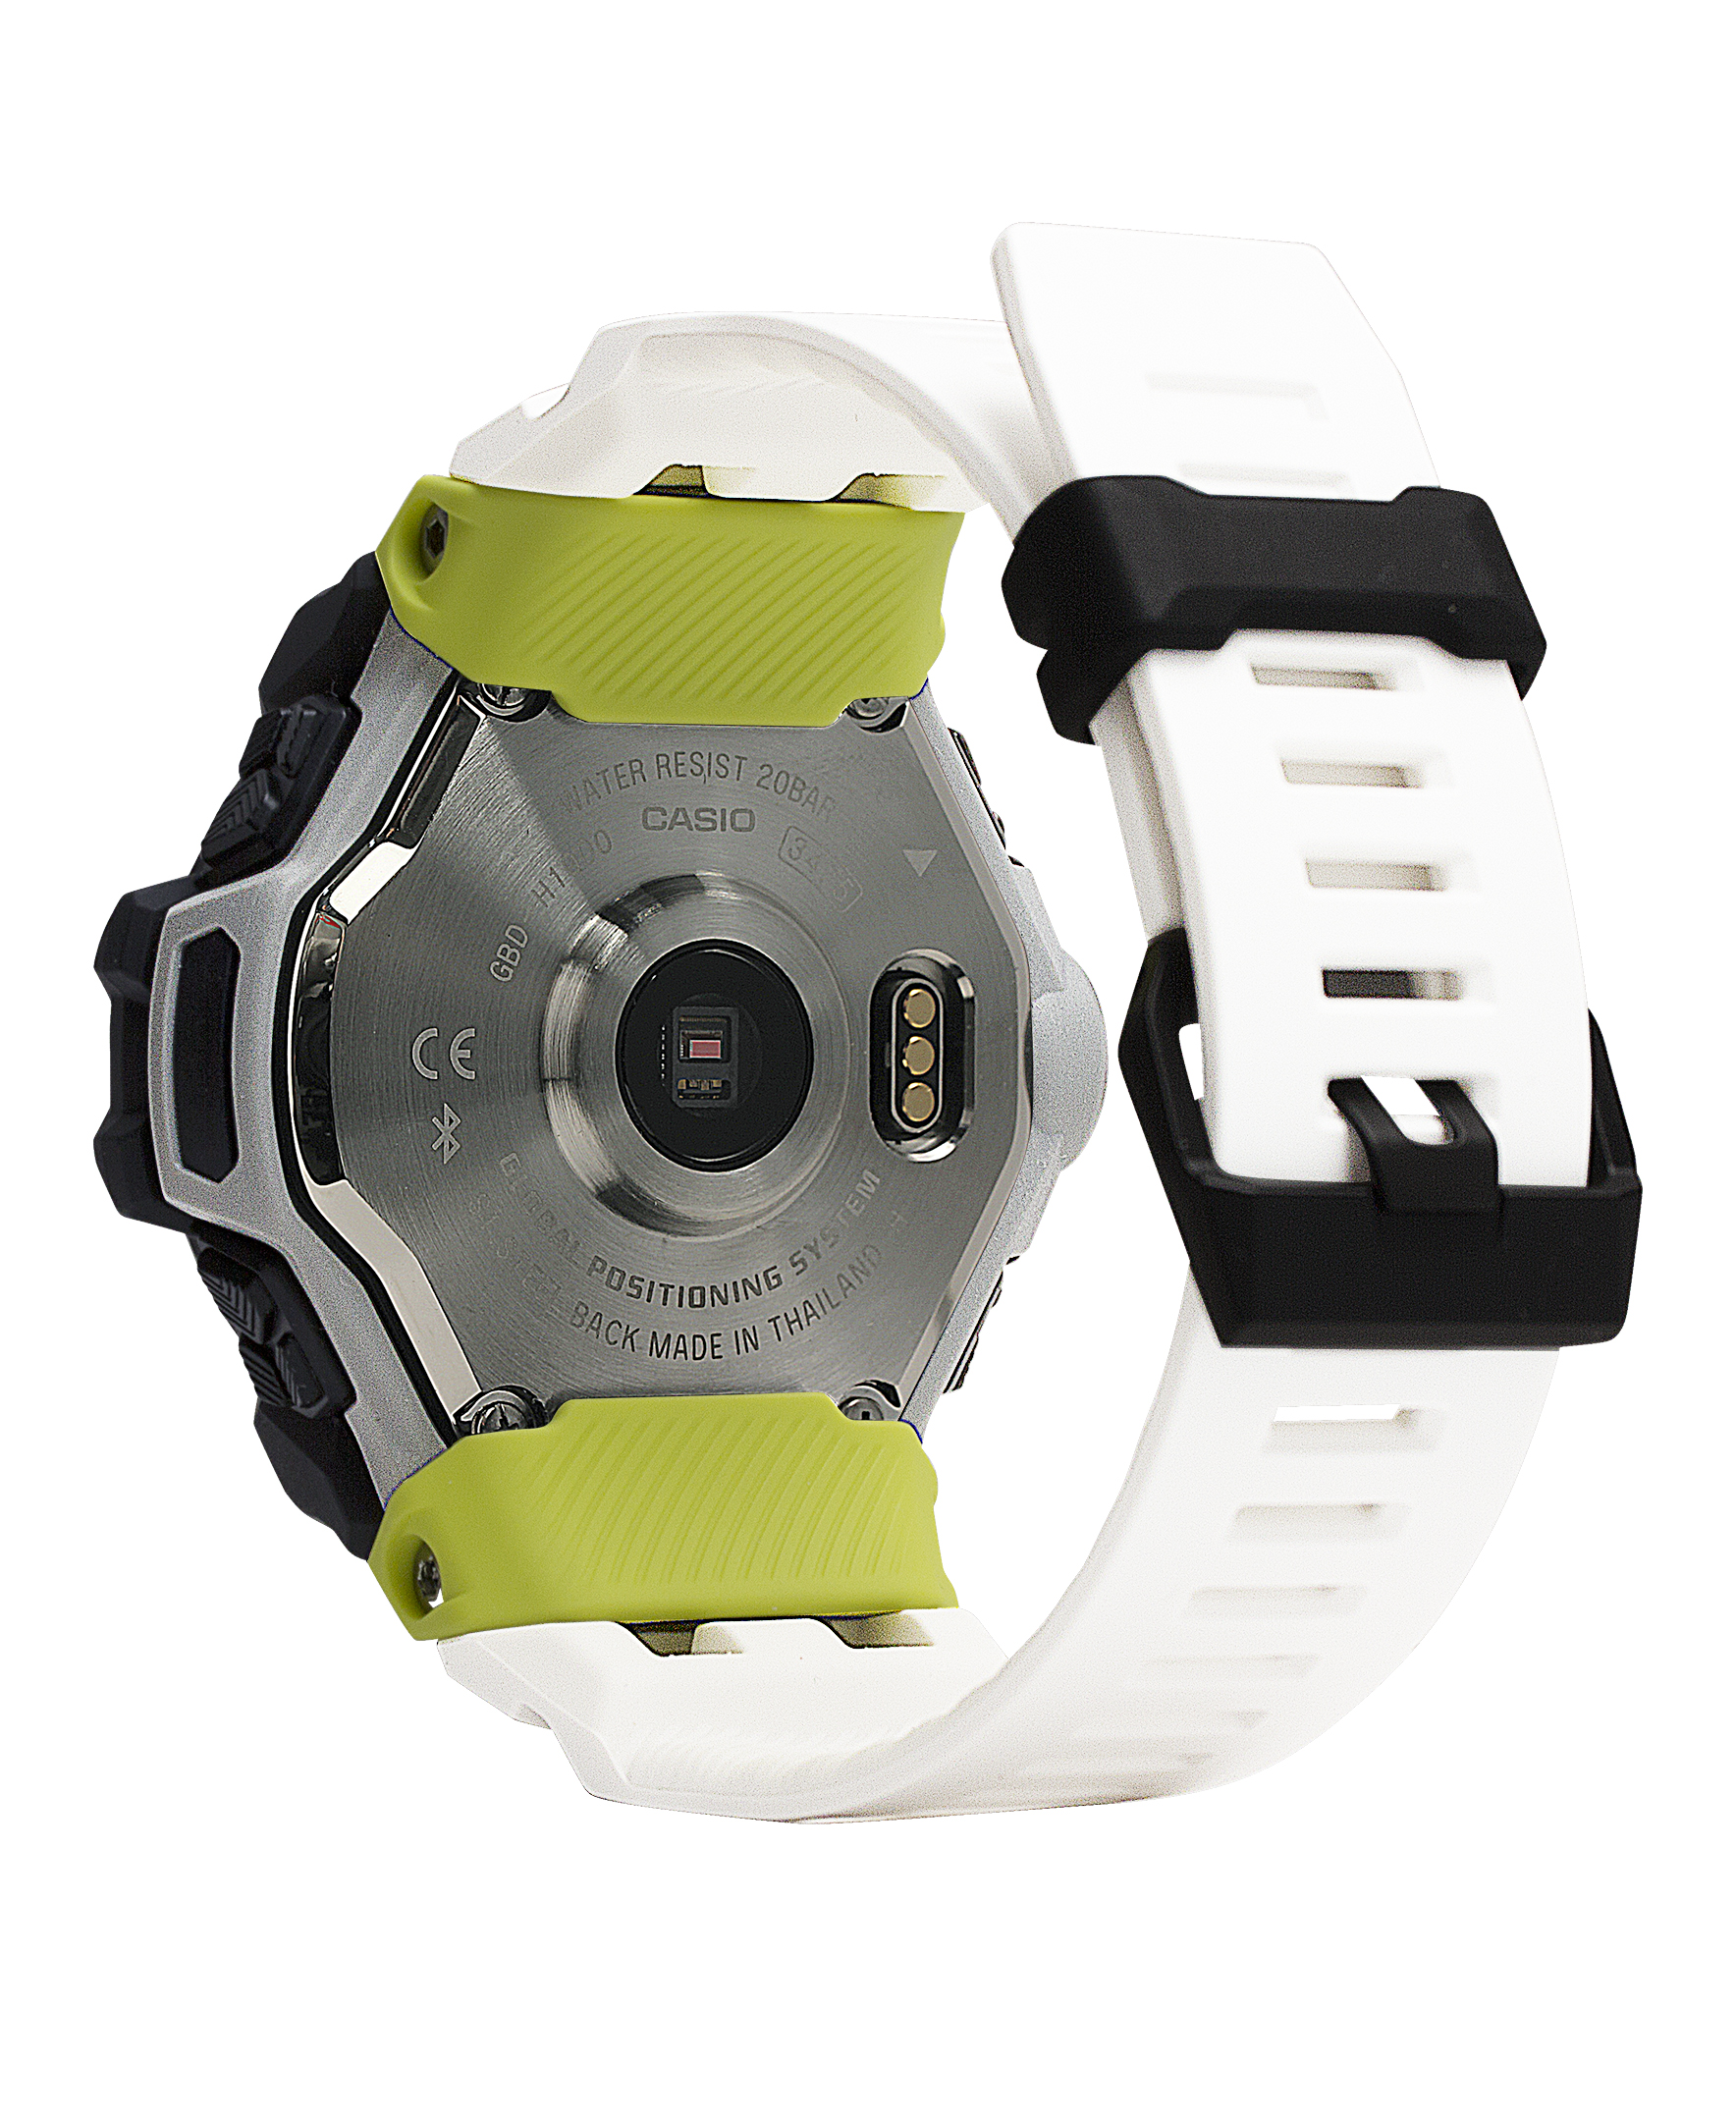 The G-Shock Move features multiple sensors to aid in maximum workout efficiency.